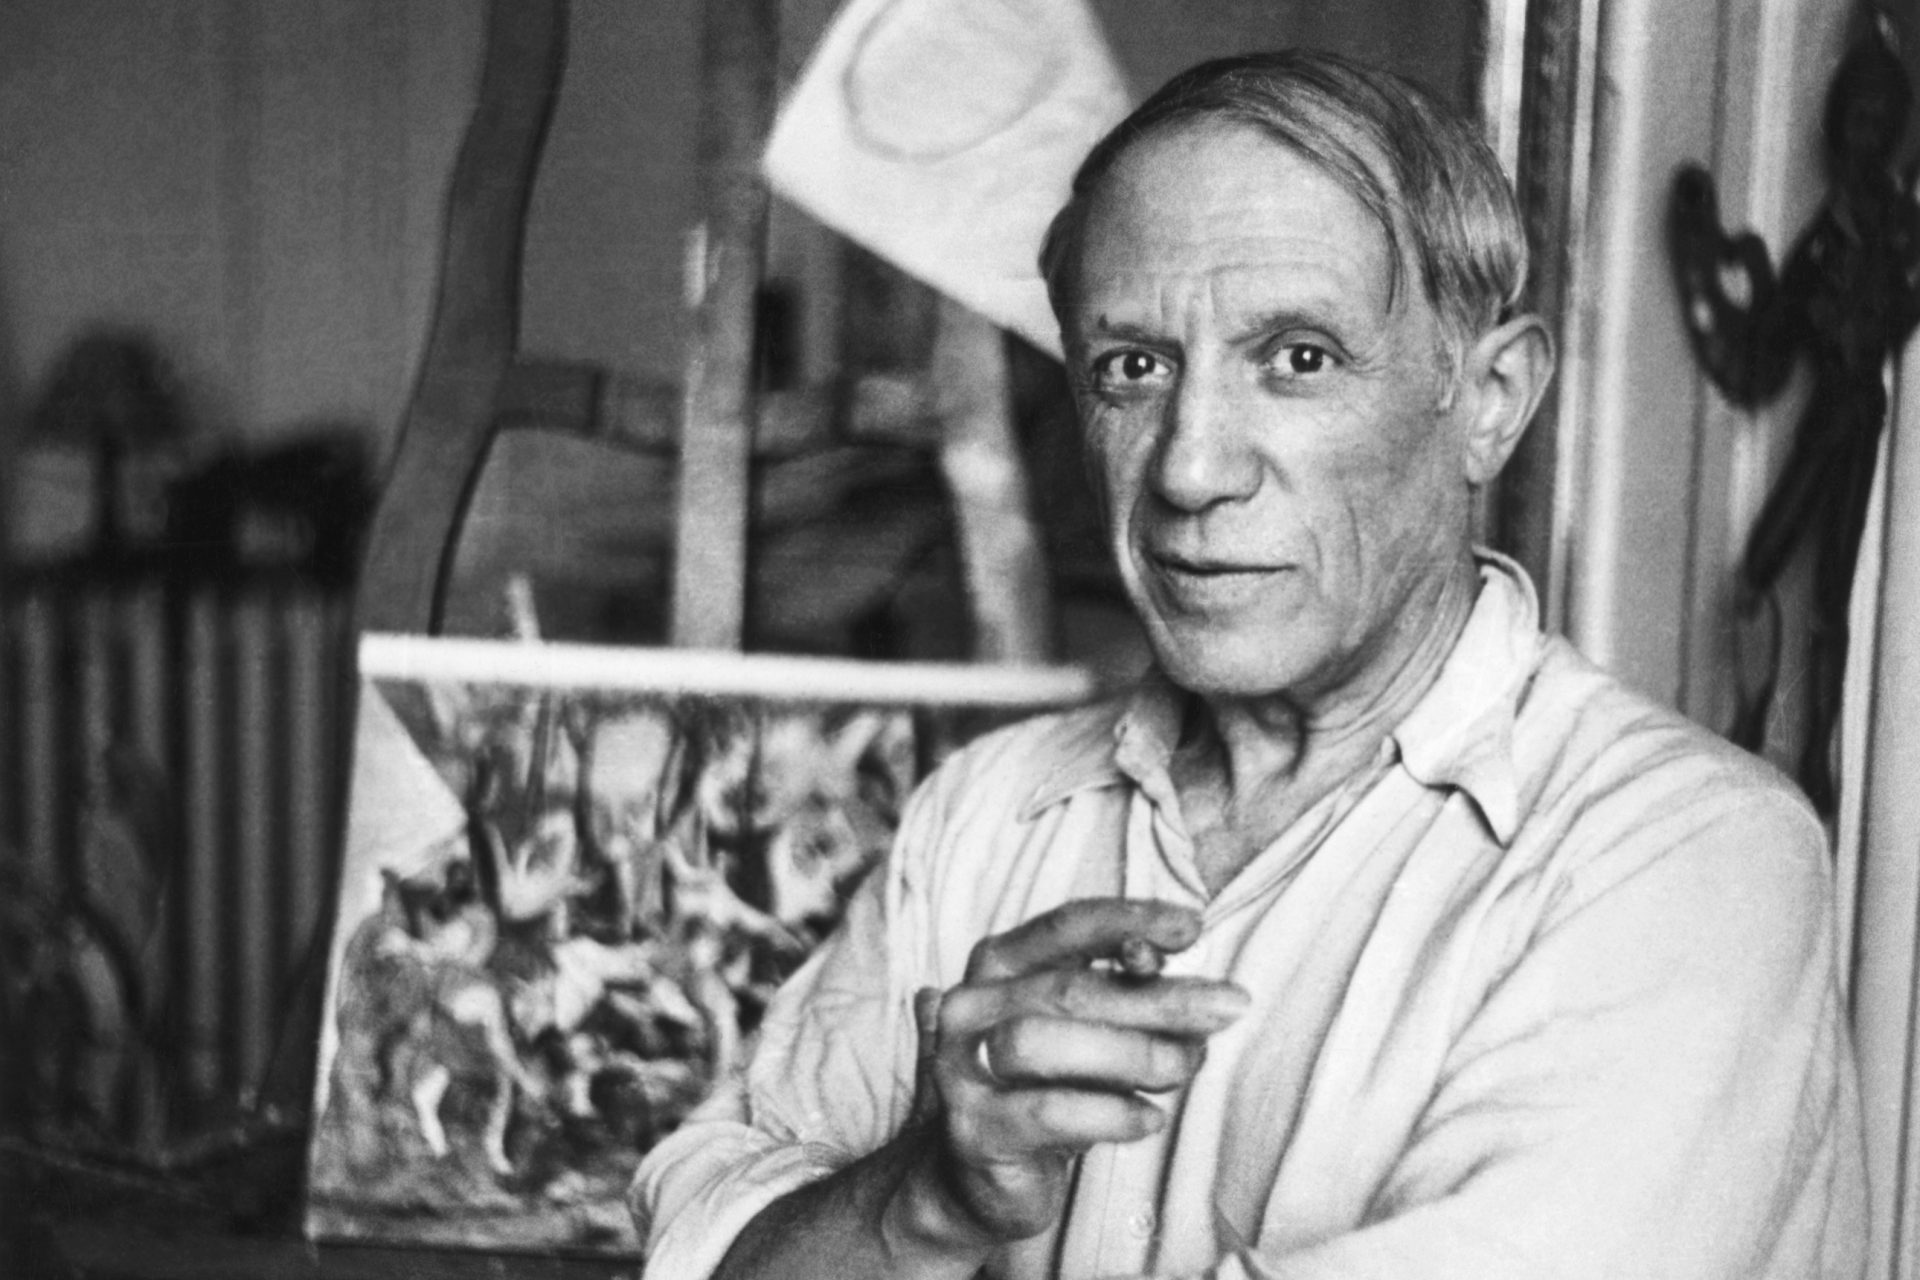 <p>Spanish painter Pablo Picasso died on April 8, 1973, in southern France at the age of 91. They say that, on the day before his death, the famous artist proposed a toast during dinner with the words: "Drink to me, drink to my health, you know I can't drink anymore," while serving wine to guests. His famous last words inspired Paul McCartney to make a song titled "Picasso's Last Words (Drink to Me)".</p>